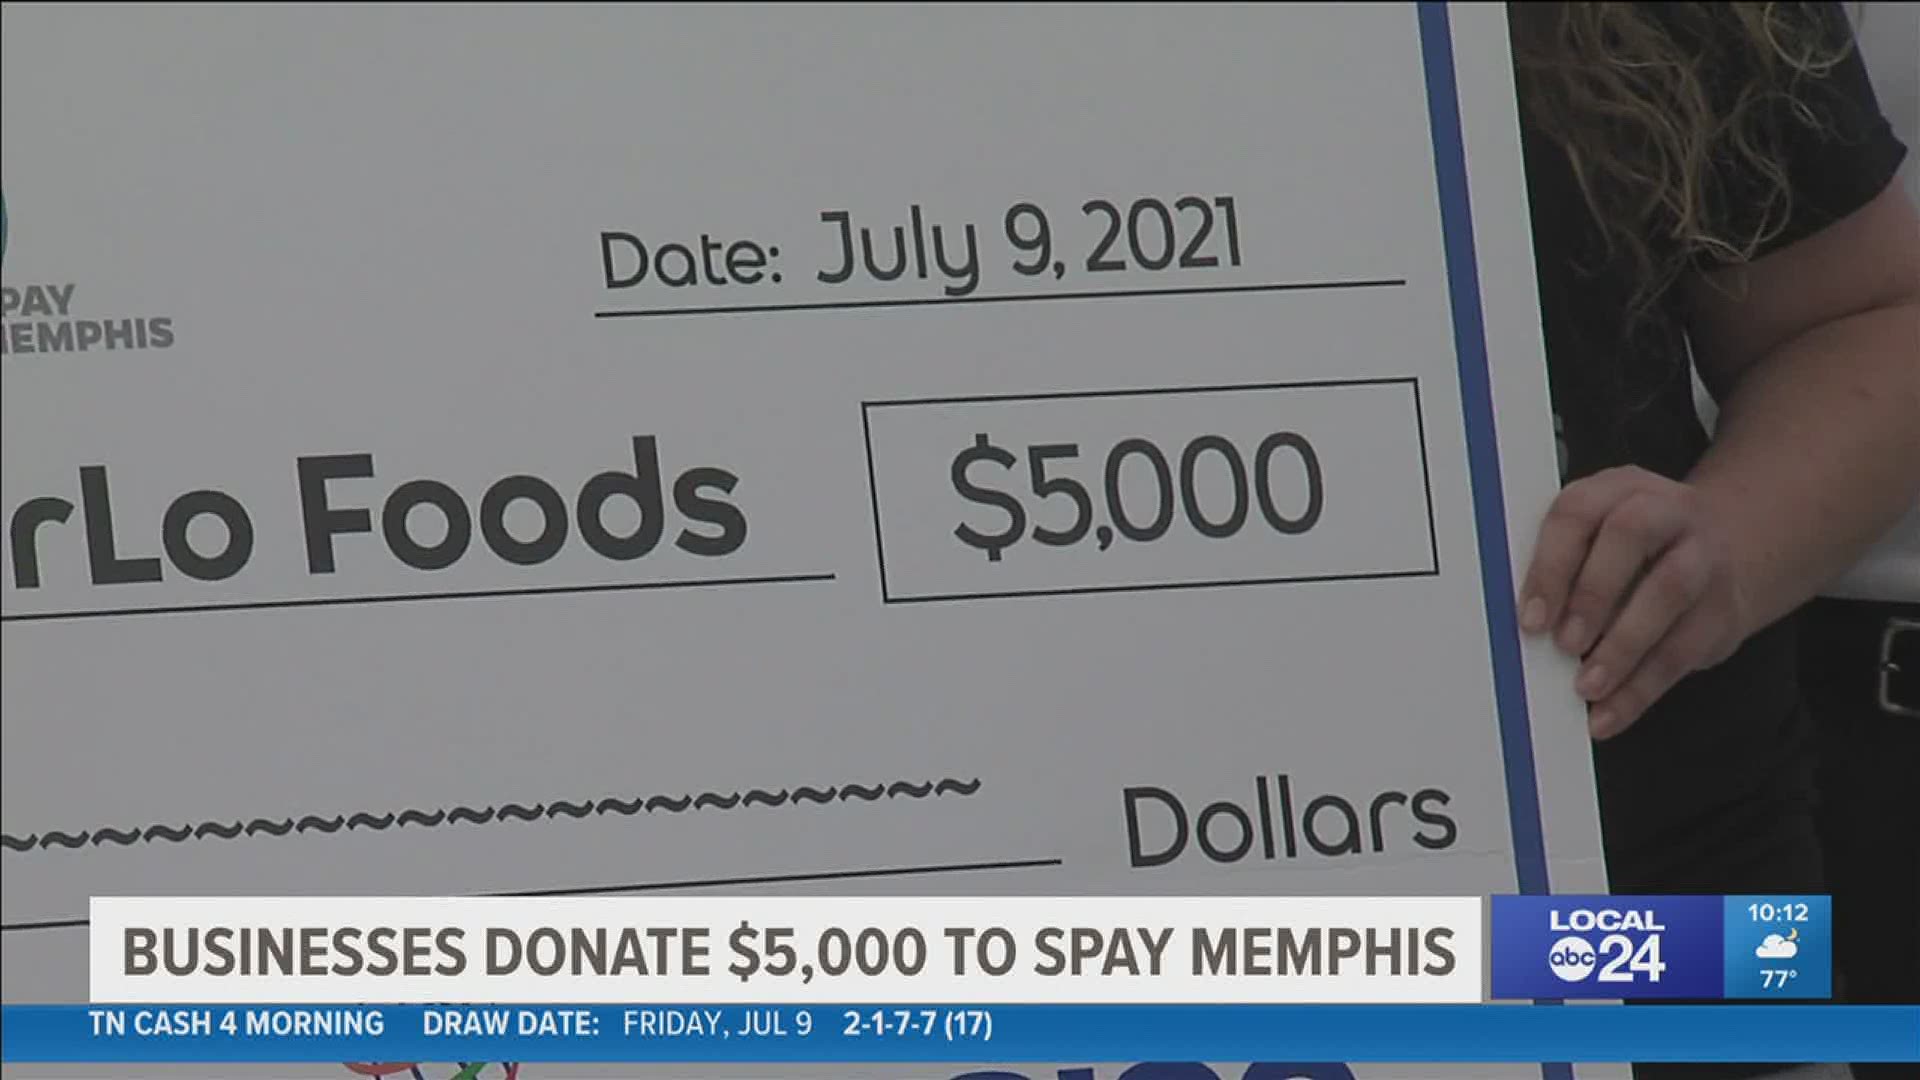 $5,000 dollars are being donated to help make spay and neuter surgeries more affordable.